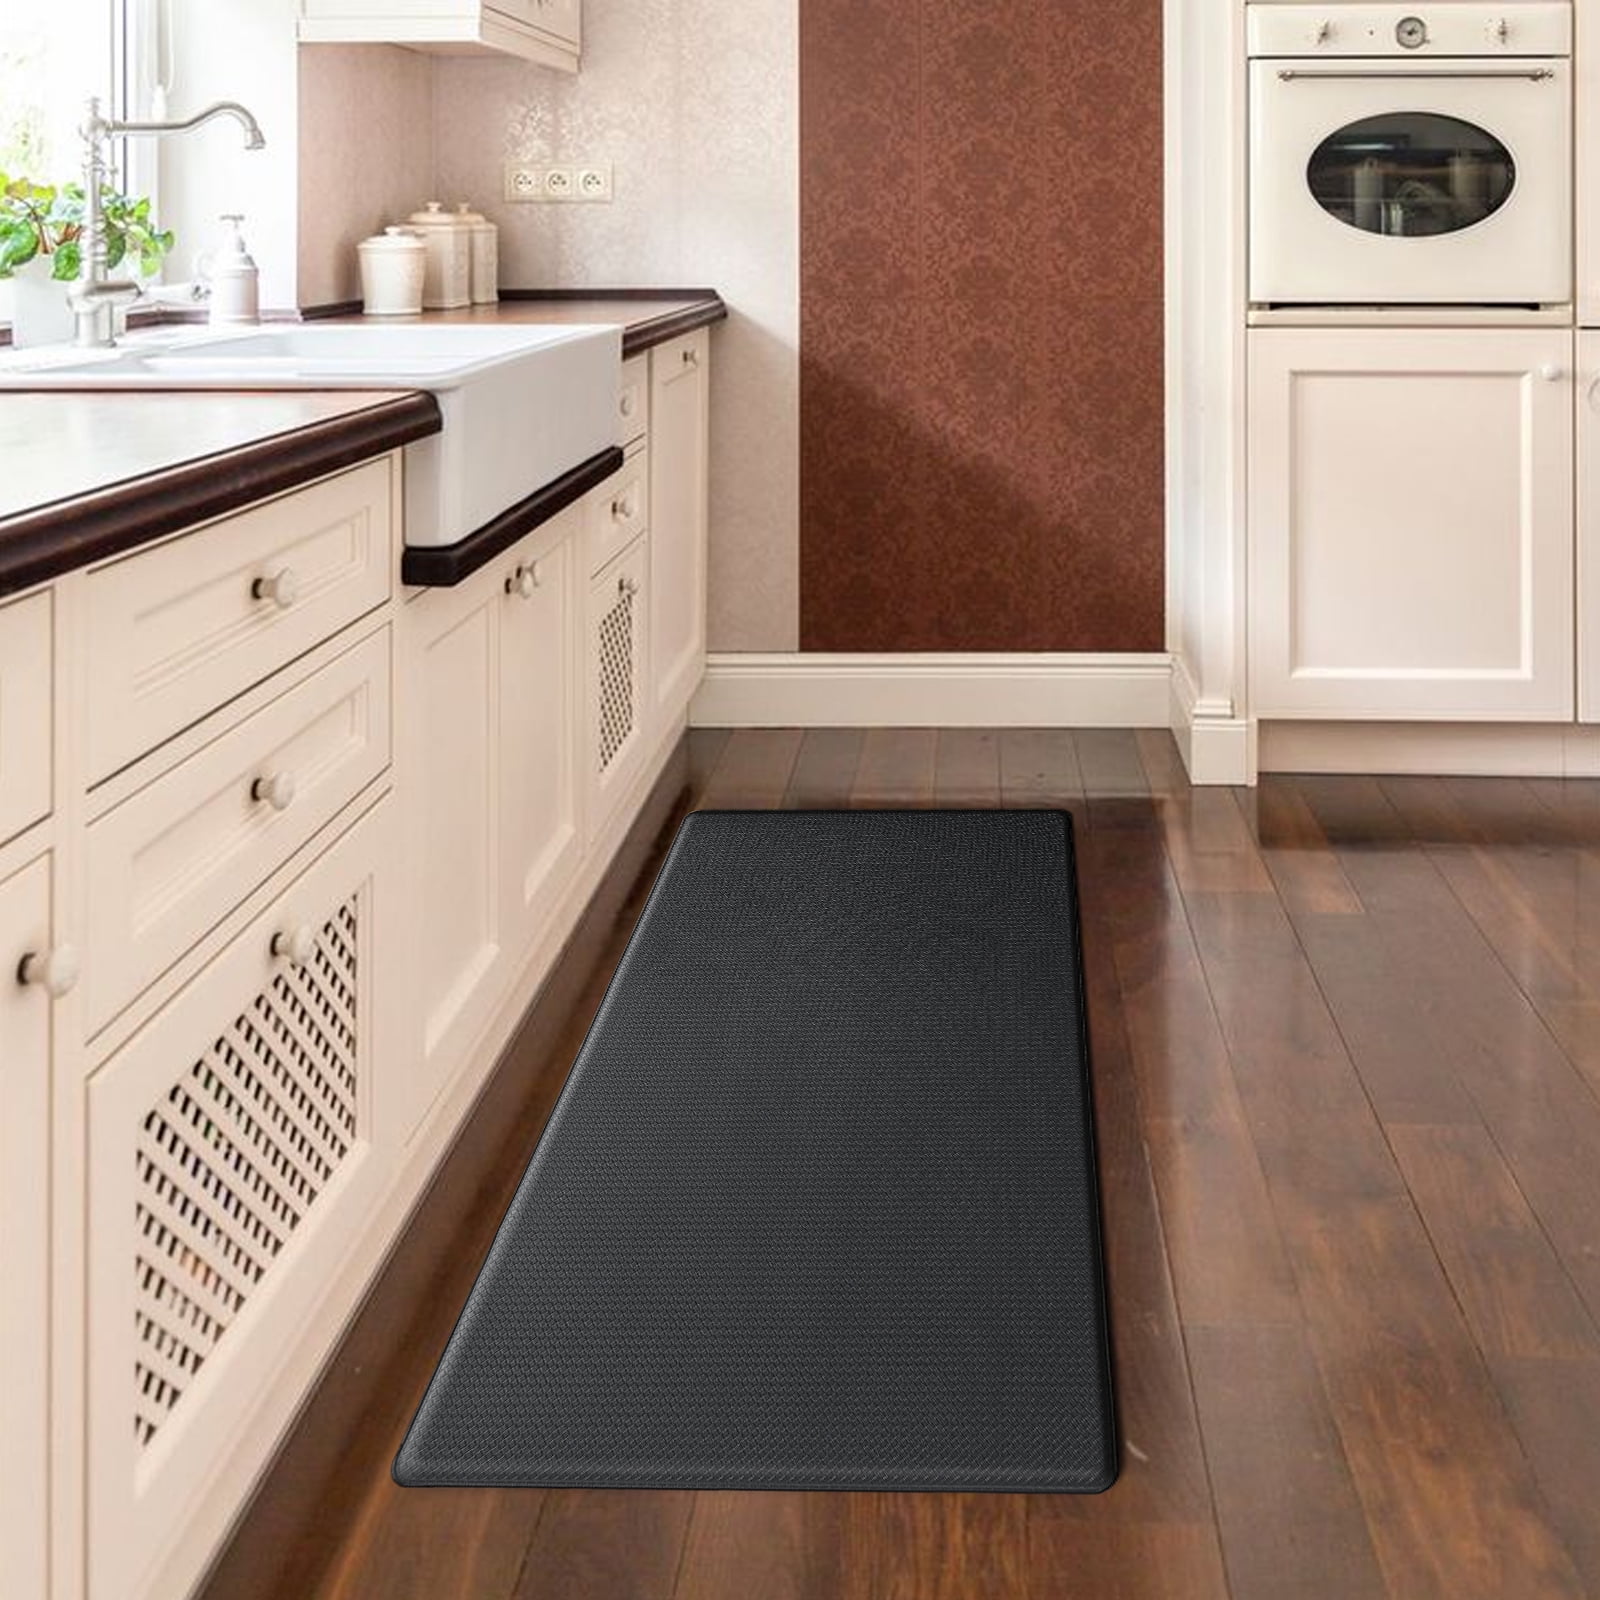 Anti Fatigue Kitchen Mat, 2PCS Cushioned Mats for Kitchen Floor/Laundry  Room/Office, Waterproof Comfort Rugs at Home (17.3'' x 47.2'' + 17.3'' x  29.5'' ) 